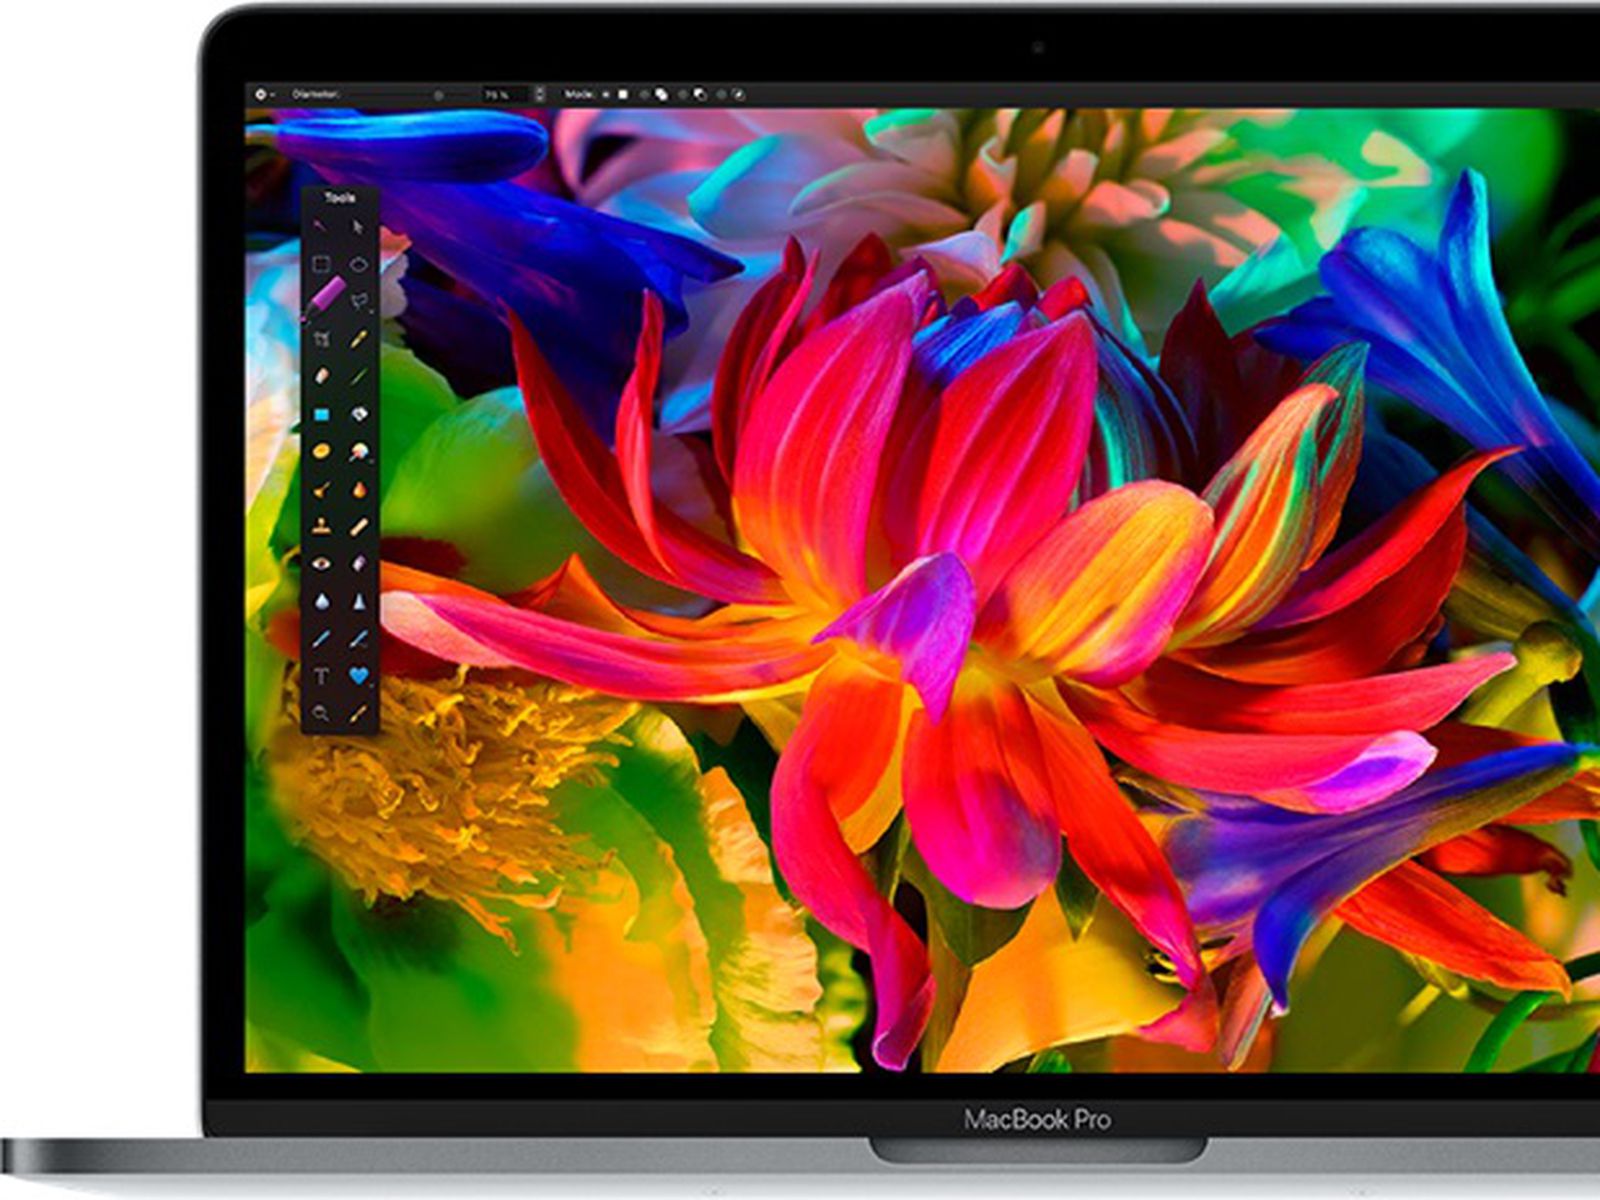 Apple Launches New Backlight Service Program For 16 13 Inch Macbook Pro Display To Address Flexgate Issues Macrumors